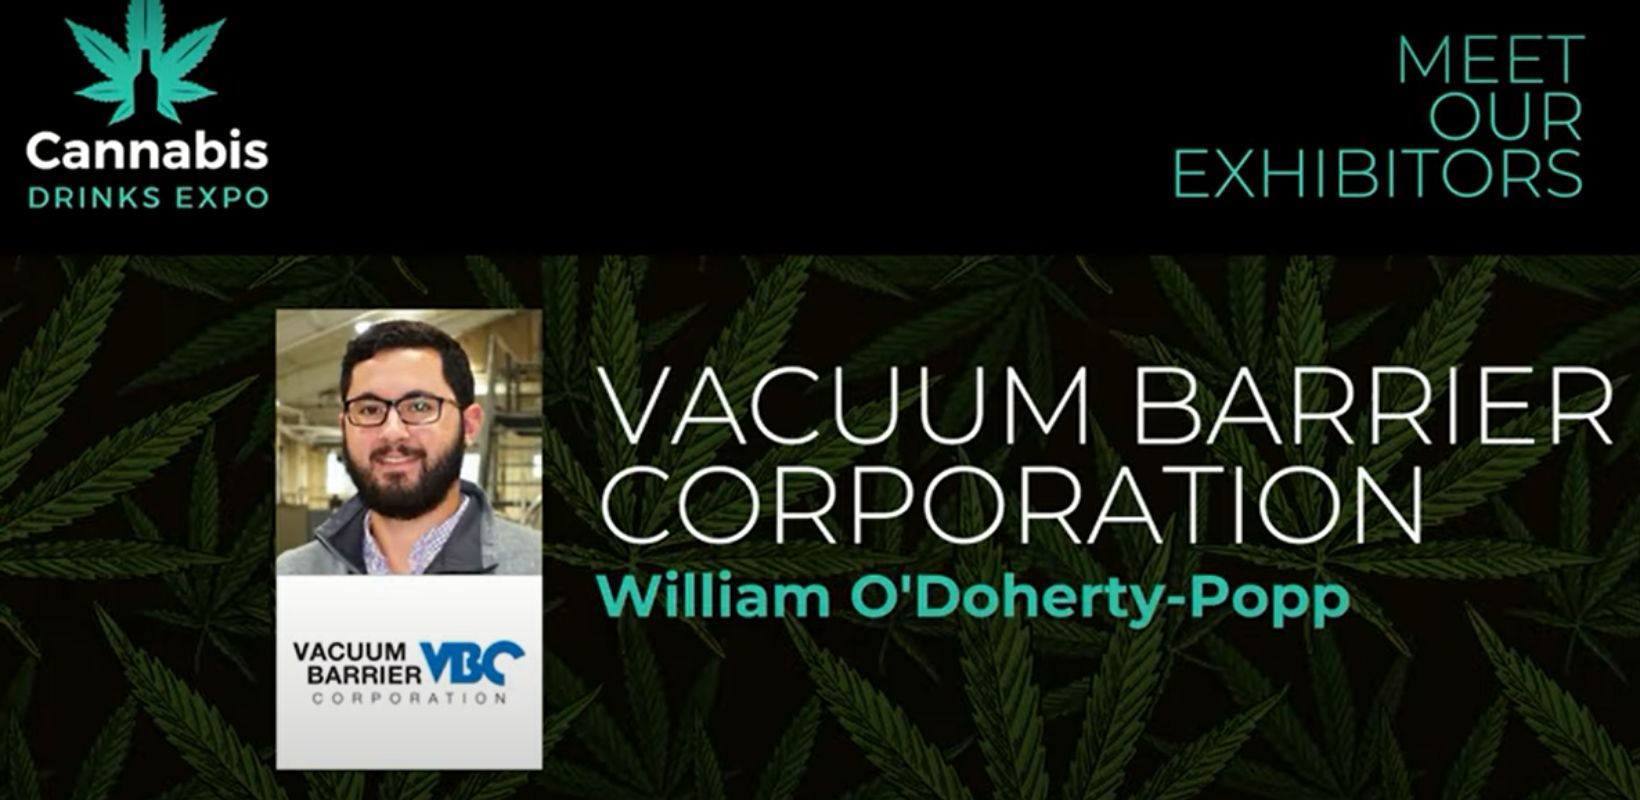 Photo for: Why Work With Vacuum Barrier Corporation: Cannabis Drinks Expo Exhibitor Spotlight